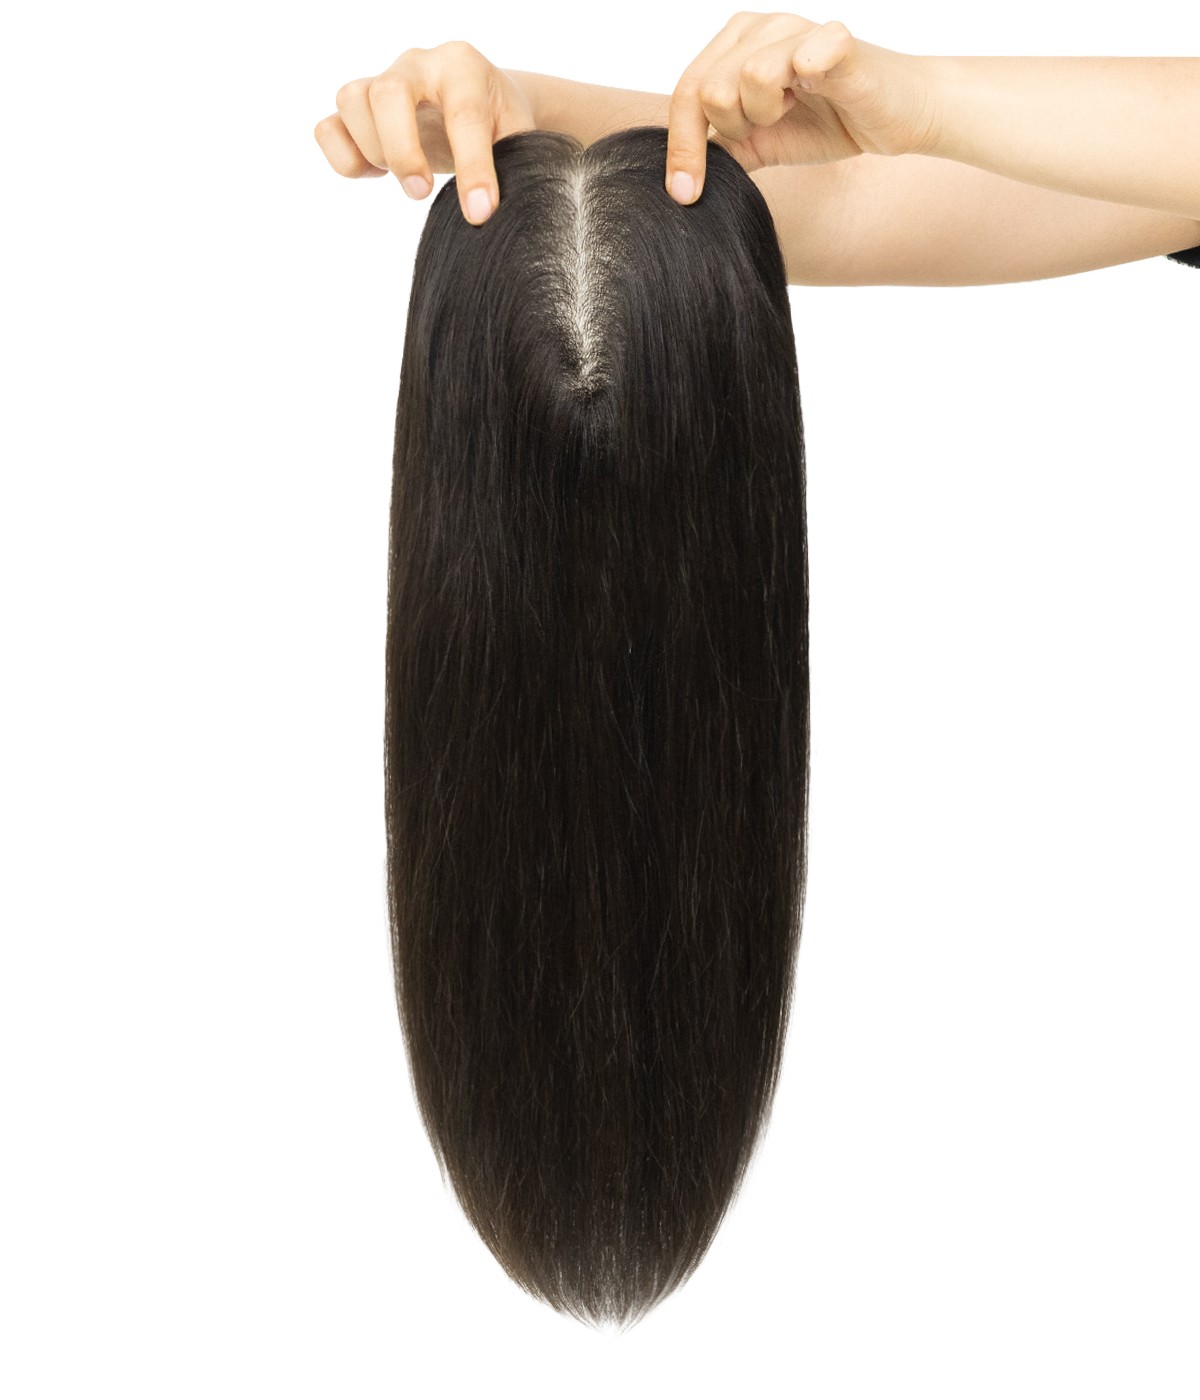 4.75"x5" Full Silk Base Human Hair Topper for Thinning Top 